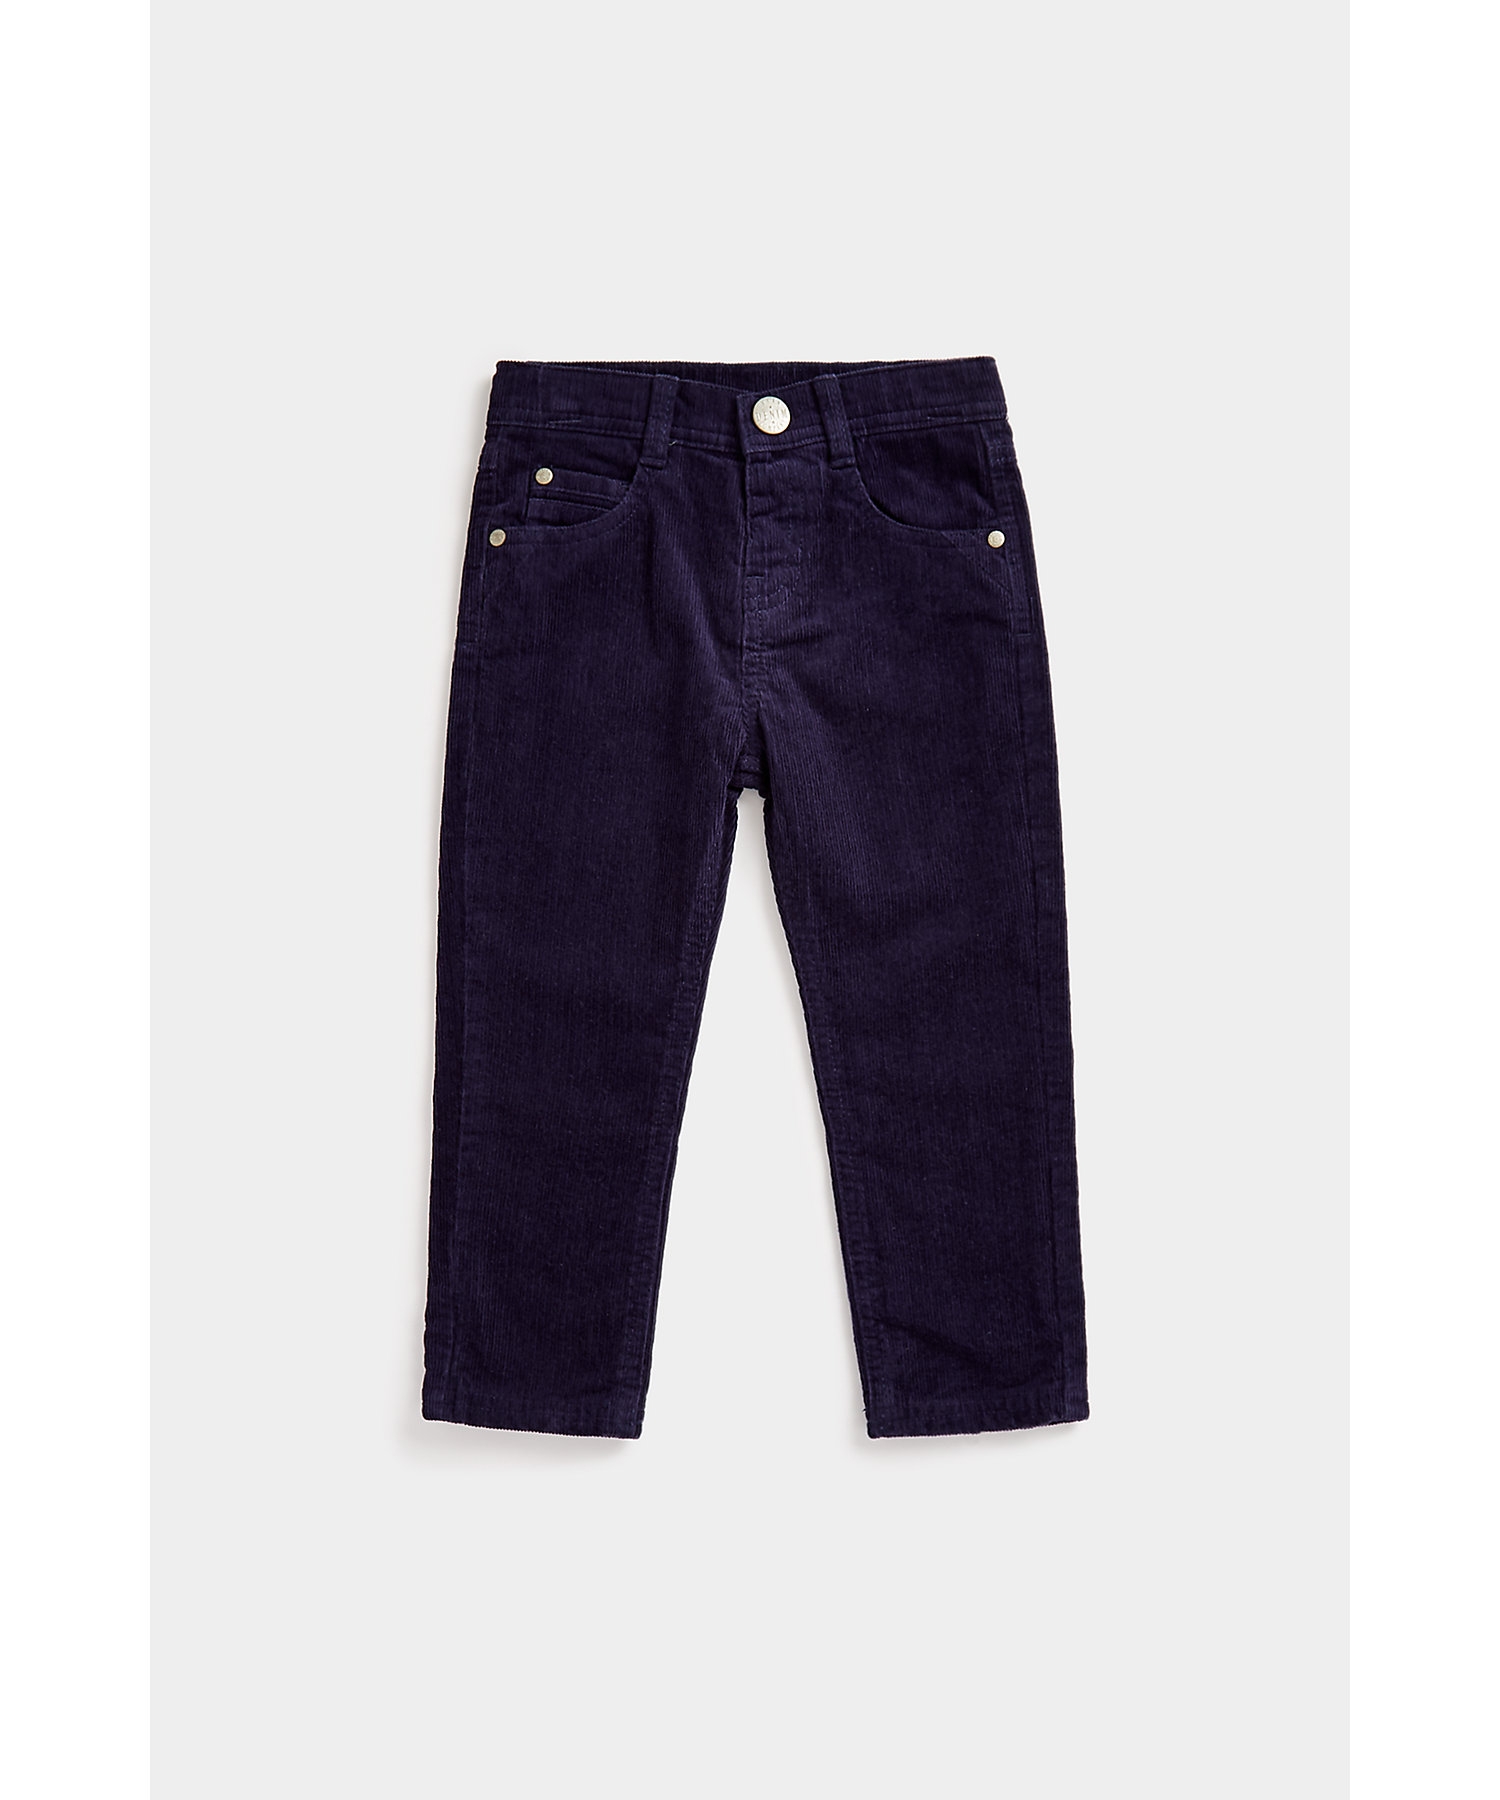 Mothercare | Boys Corduroy Trousers -Navy 0